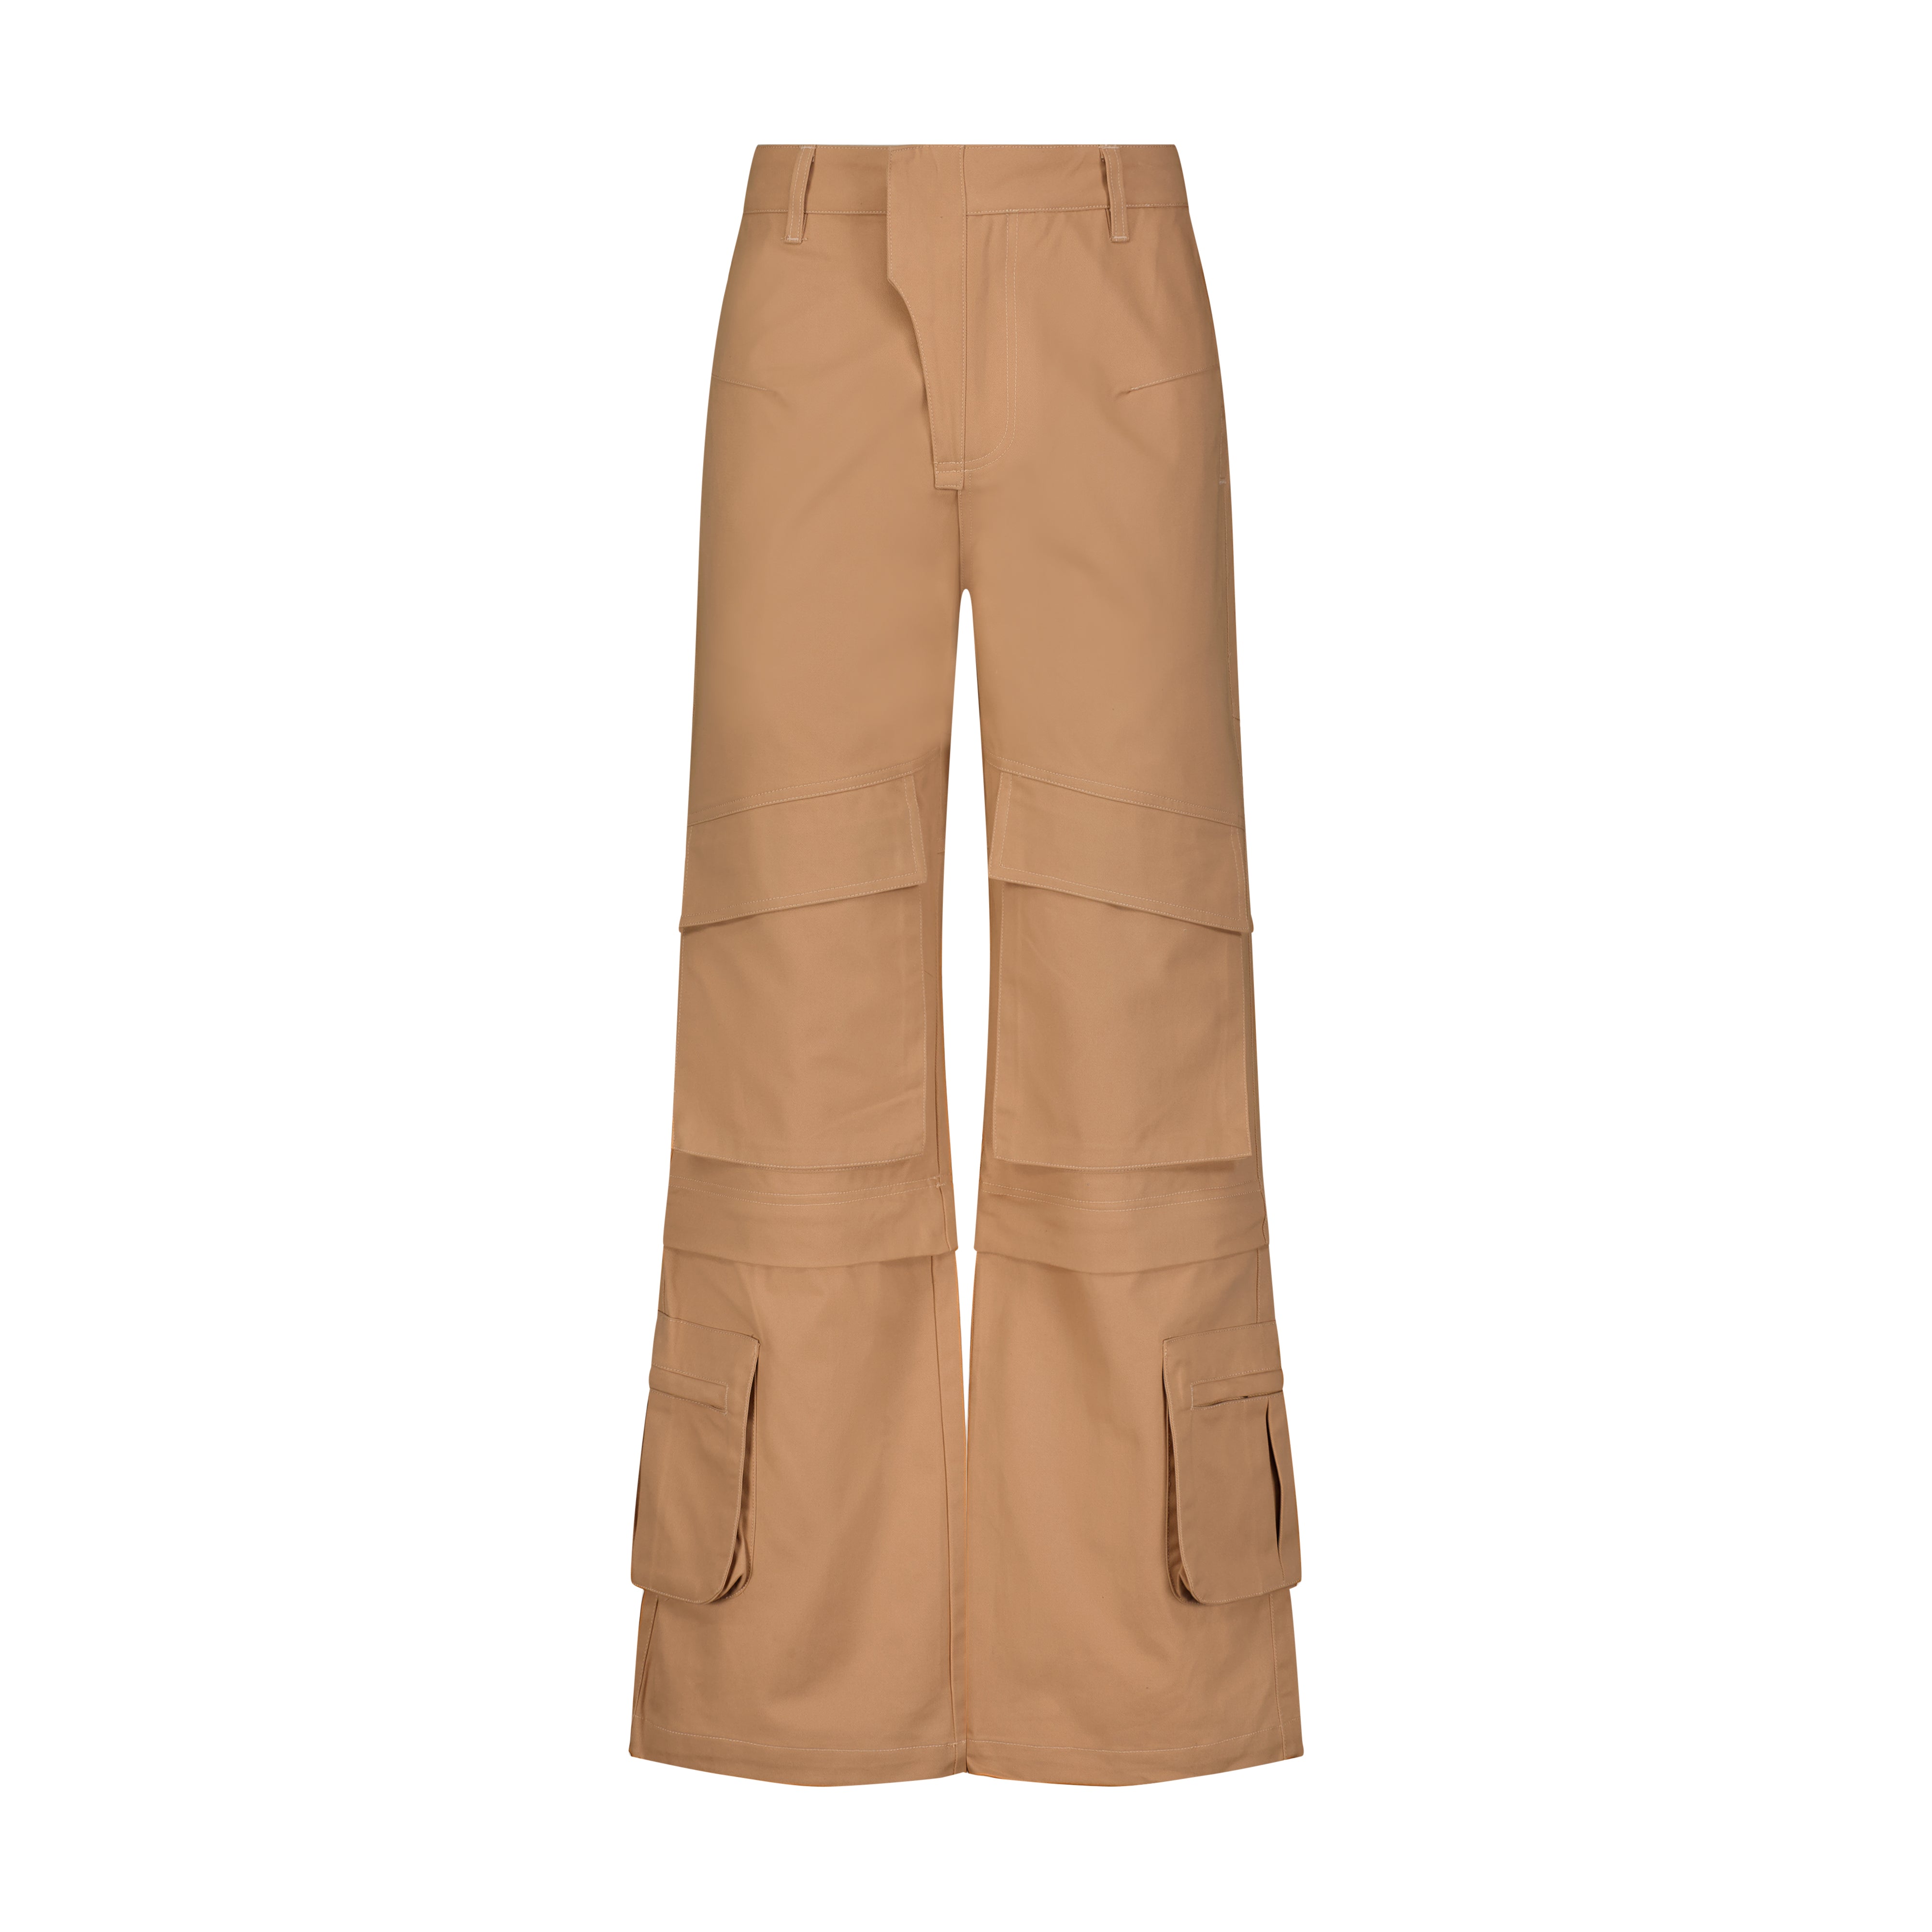 Saint Perry Men's Panelled Hard Cotton Cargo Trousers - Dusty Brown